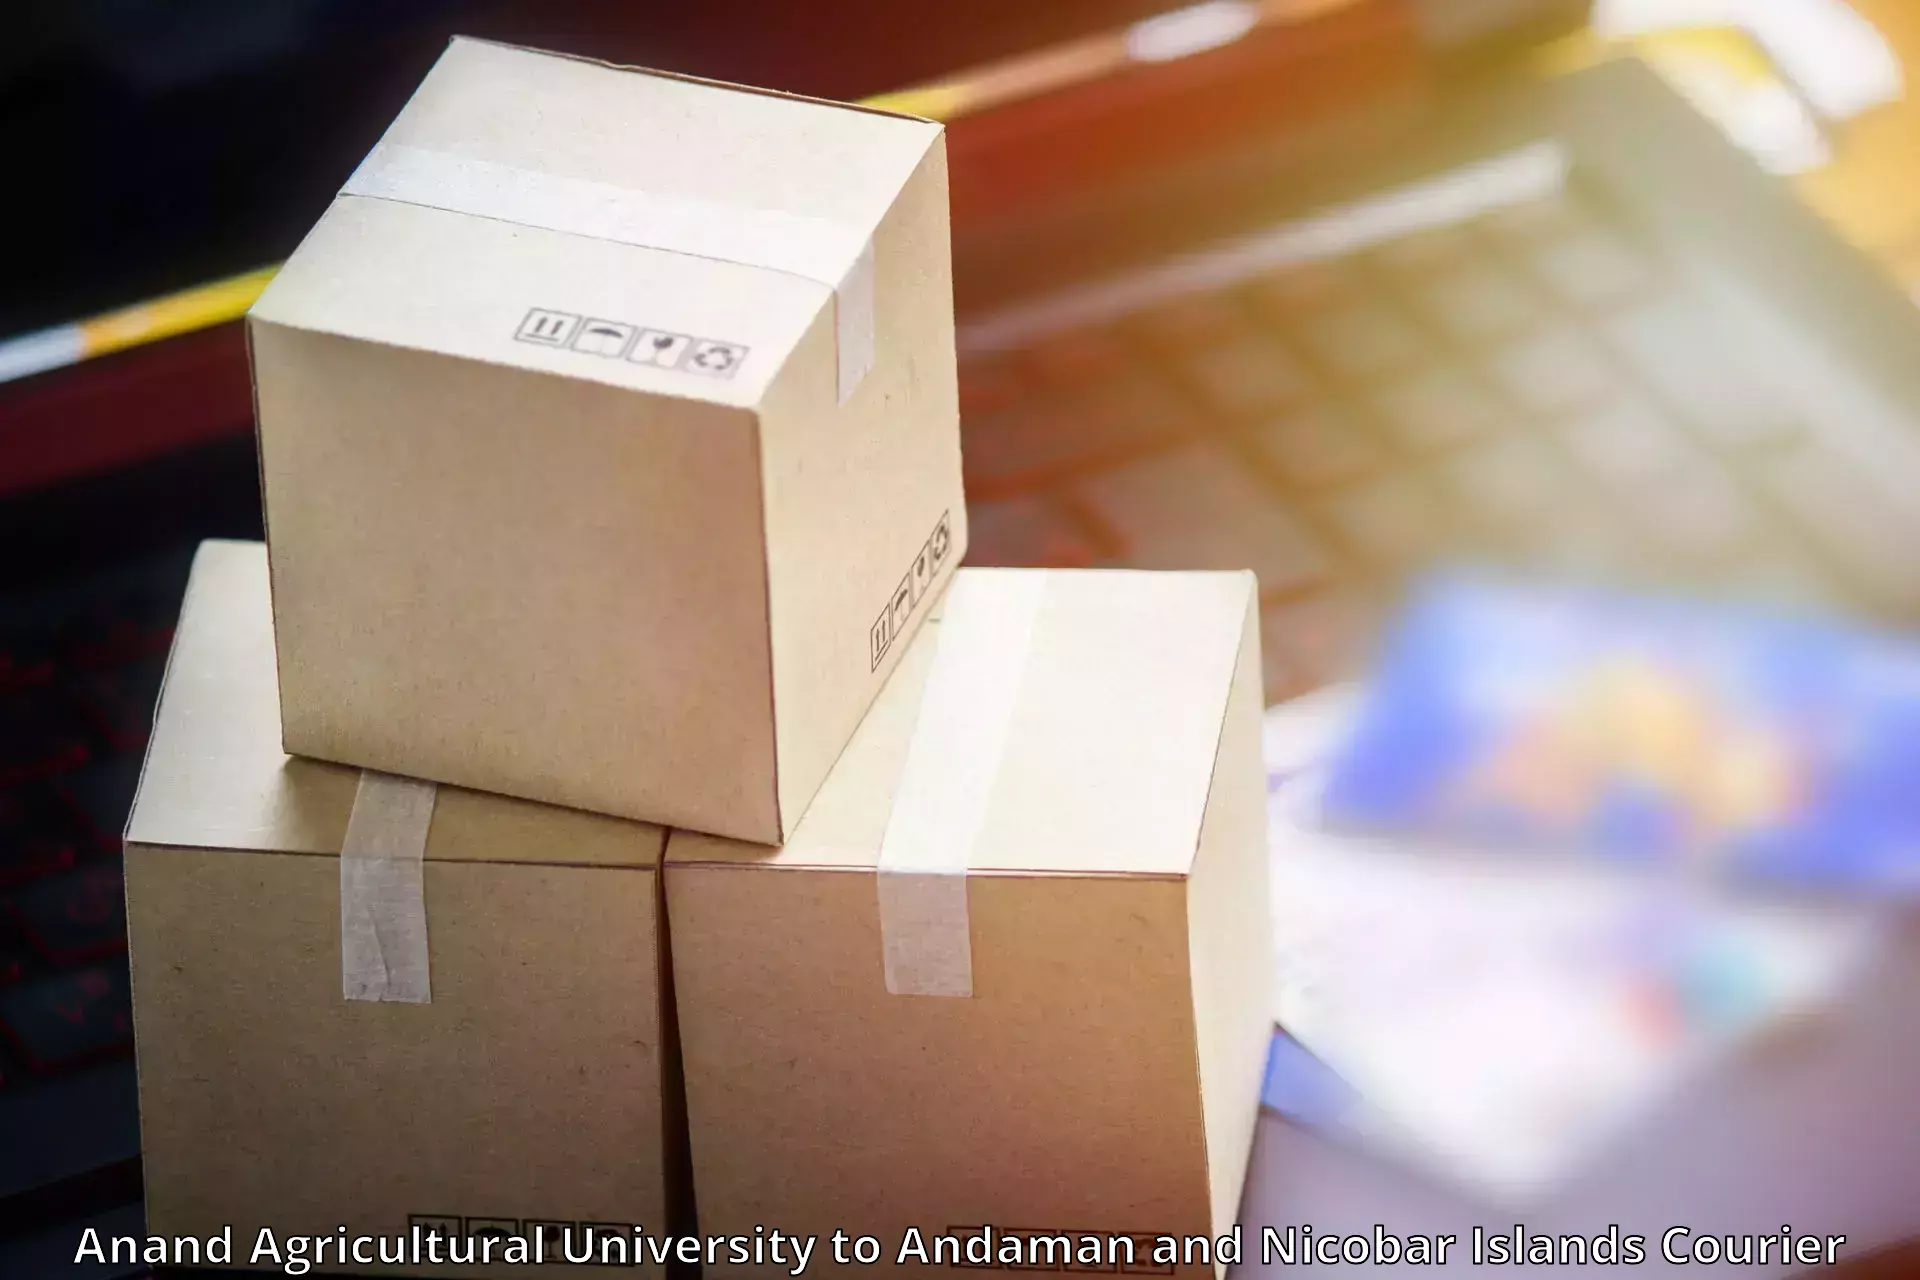 Premium courier solutions Anand Agricultural University to Andaman and Nicobar Islands